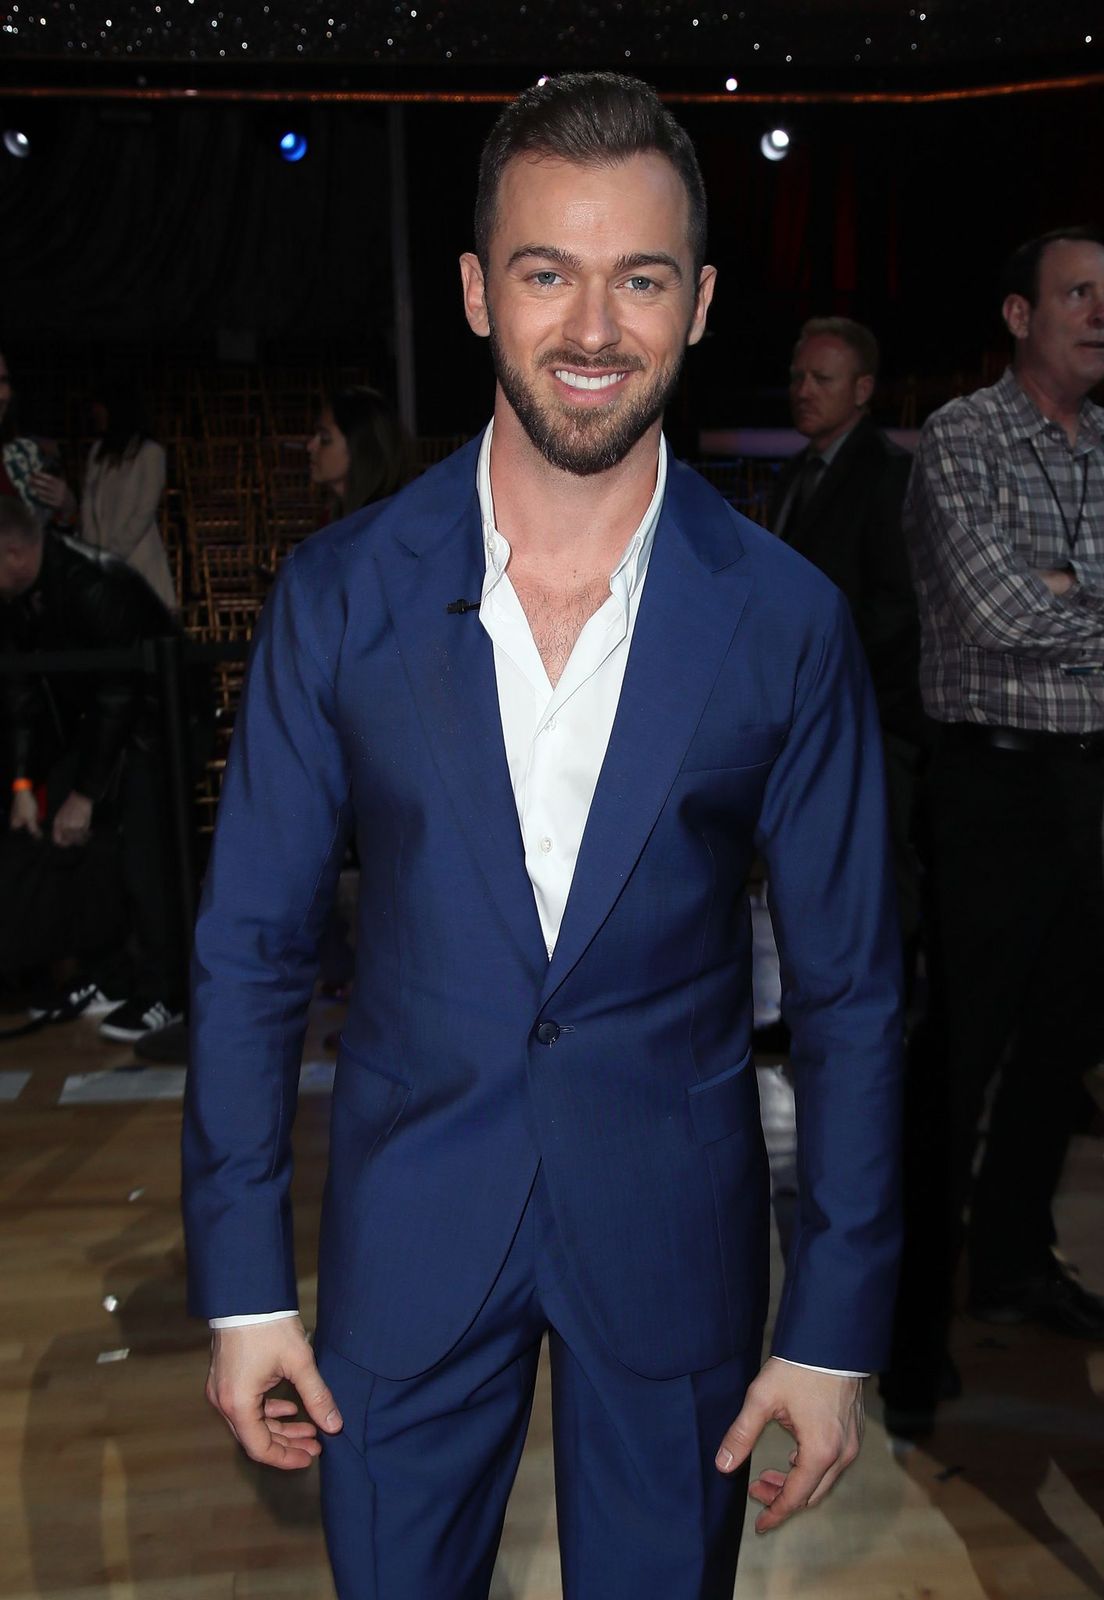 Artem Chigvintsev at "Dancing with the Stars" season 24 premiere at CBS Television City on March 20, 2017 | Photo: Getty Images